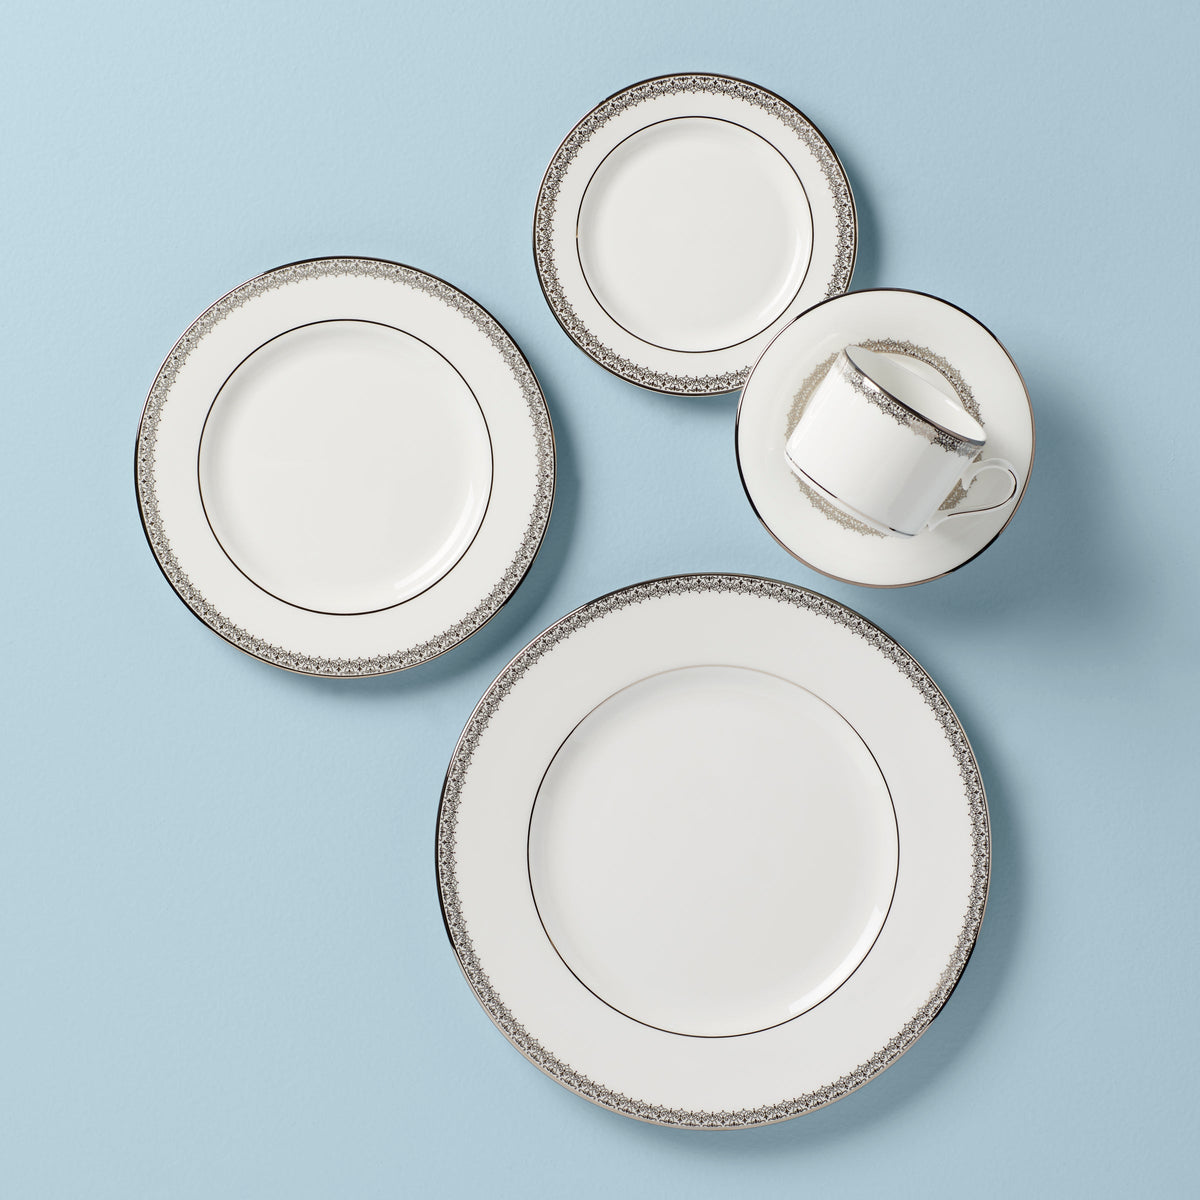 Lace Couture Dinnerware Collection – Lenox Corporation